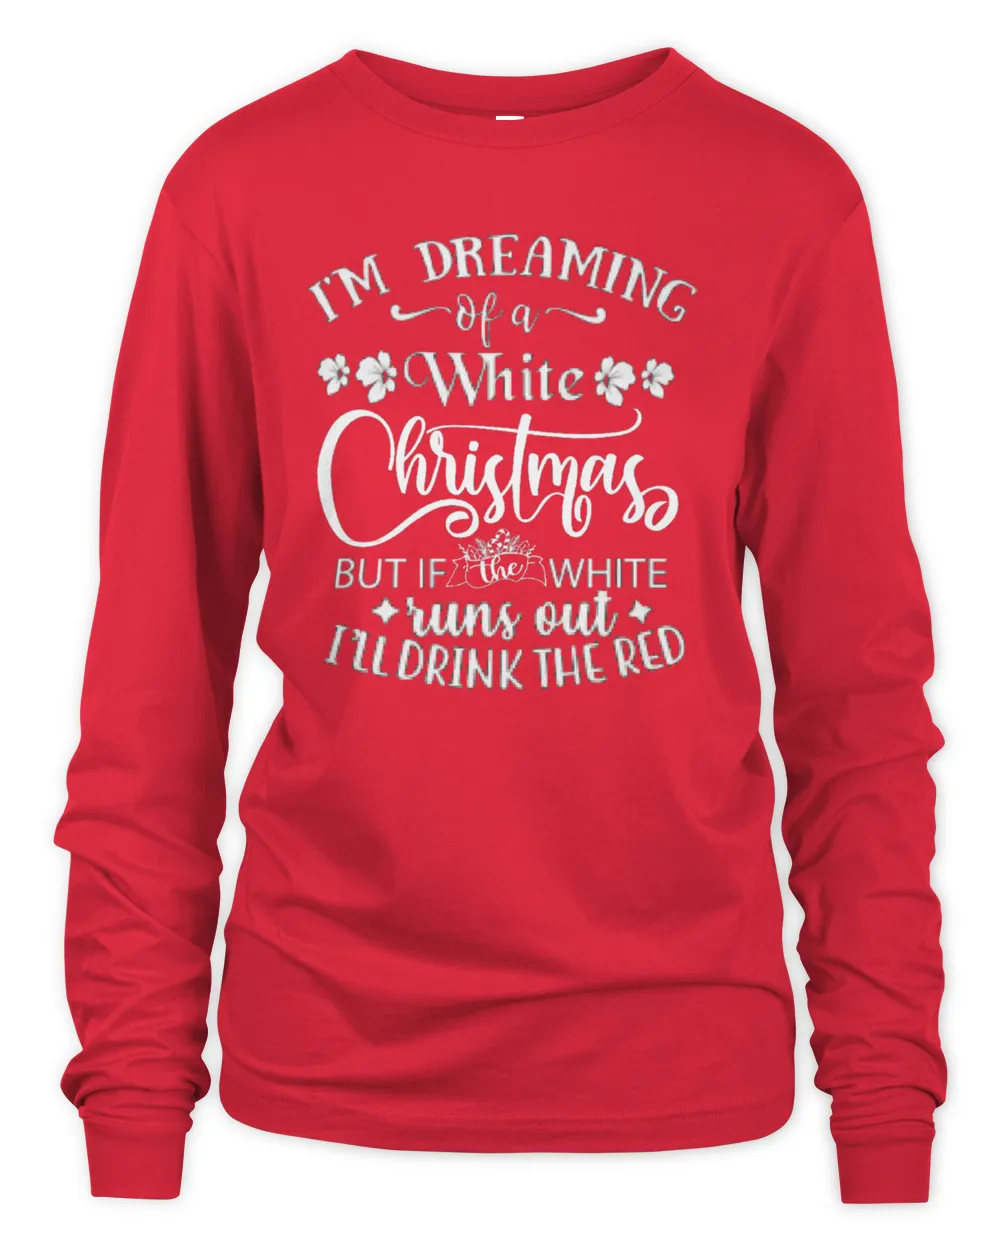 I'm dreaming of a white Christmas. But if the white runs out, I'll drink the red. T-Shirt